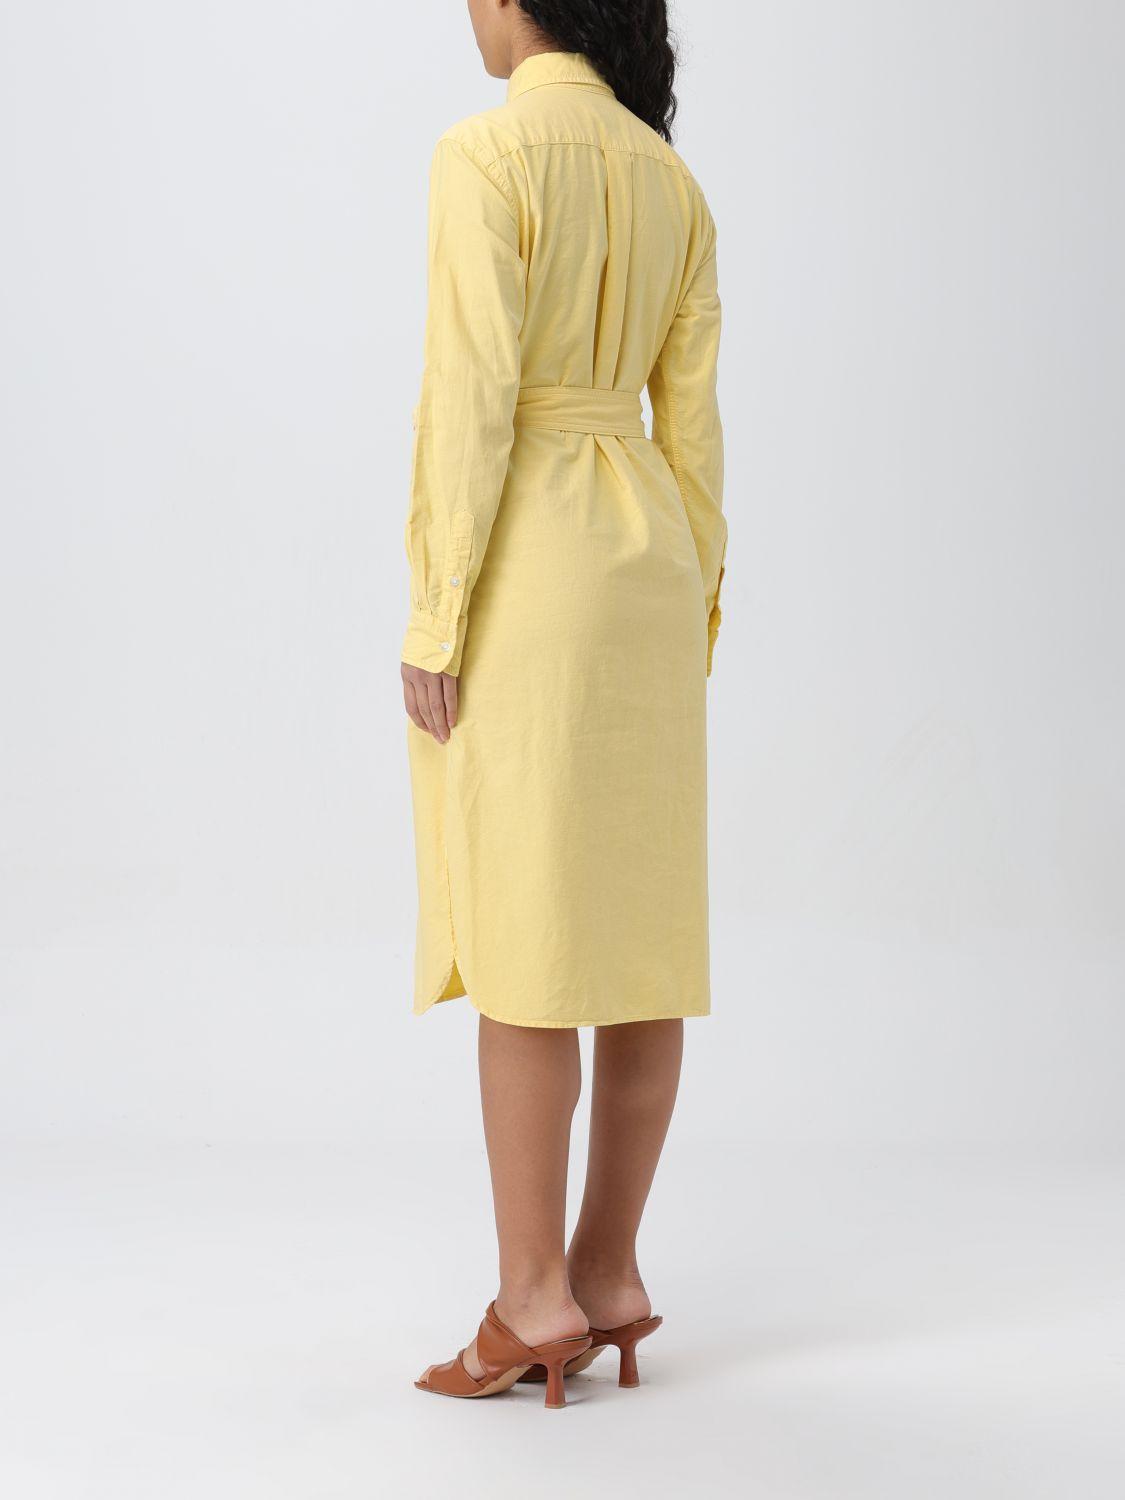 Ruth Langsford Yellow Chain Dress This Morning July 2020 – Fashion You  Really Want